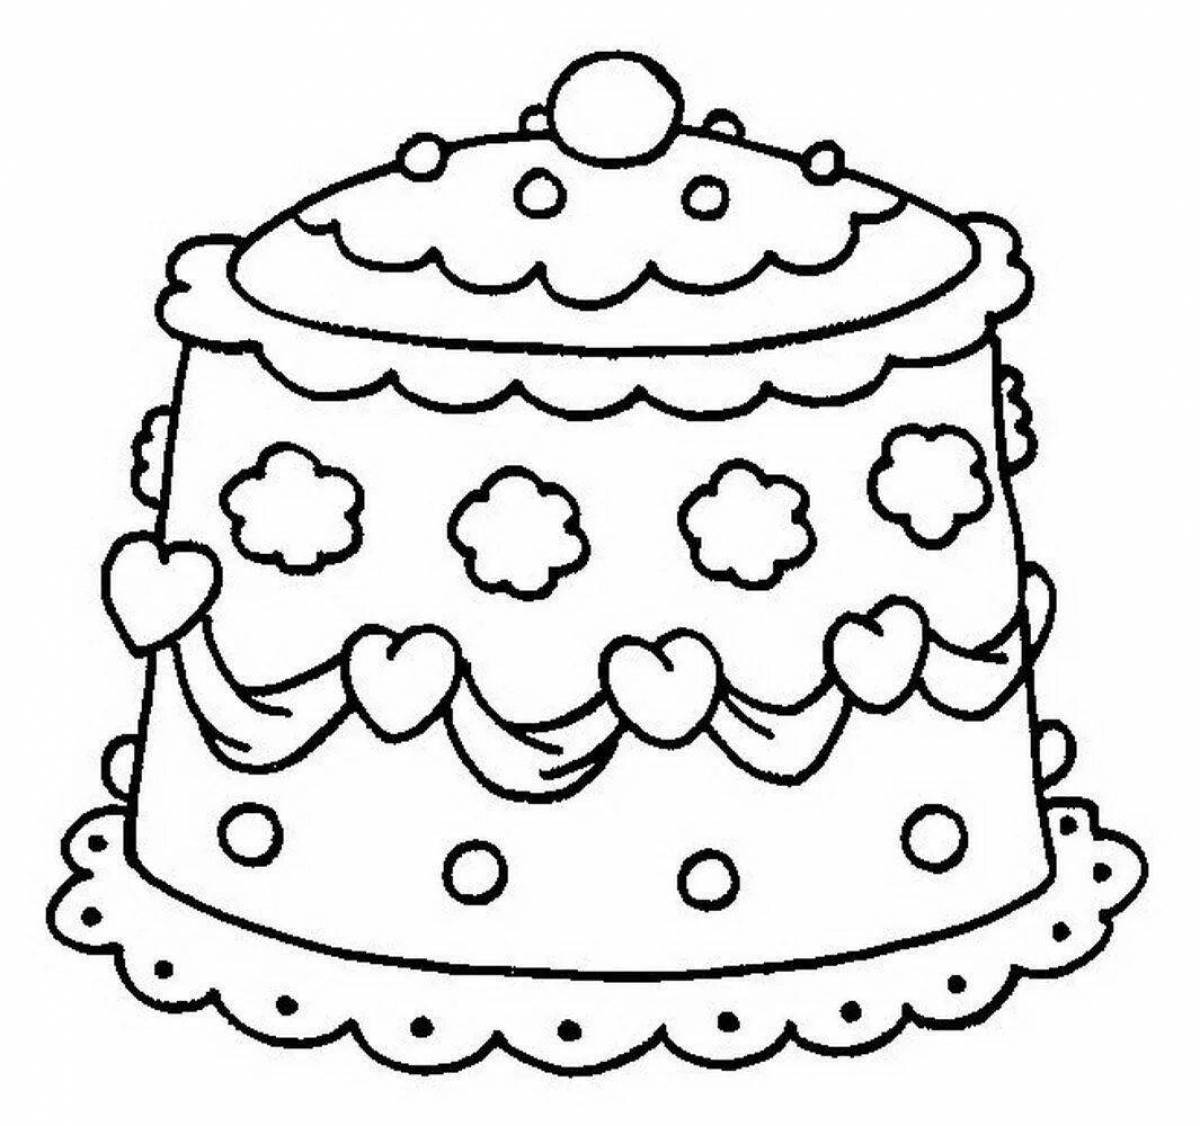 Colorful cake coloring book for 3-4 year olds